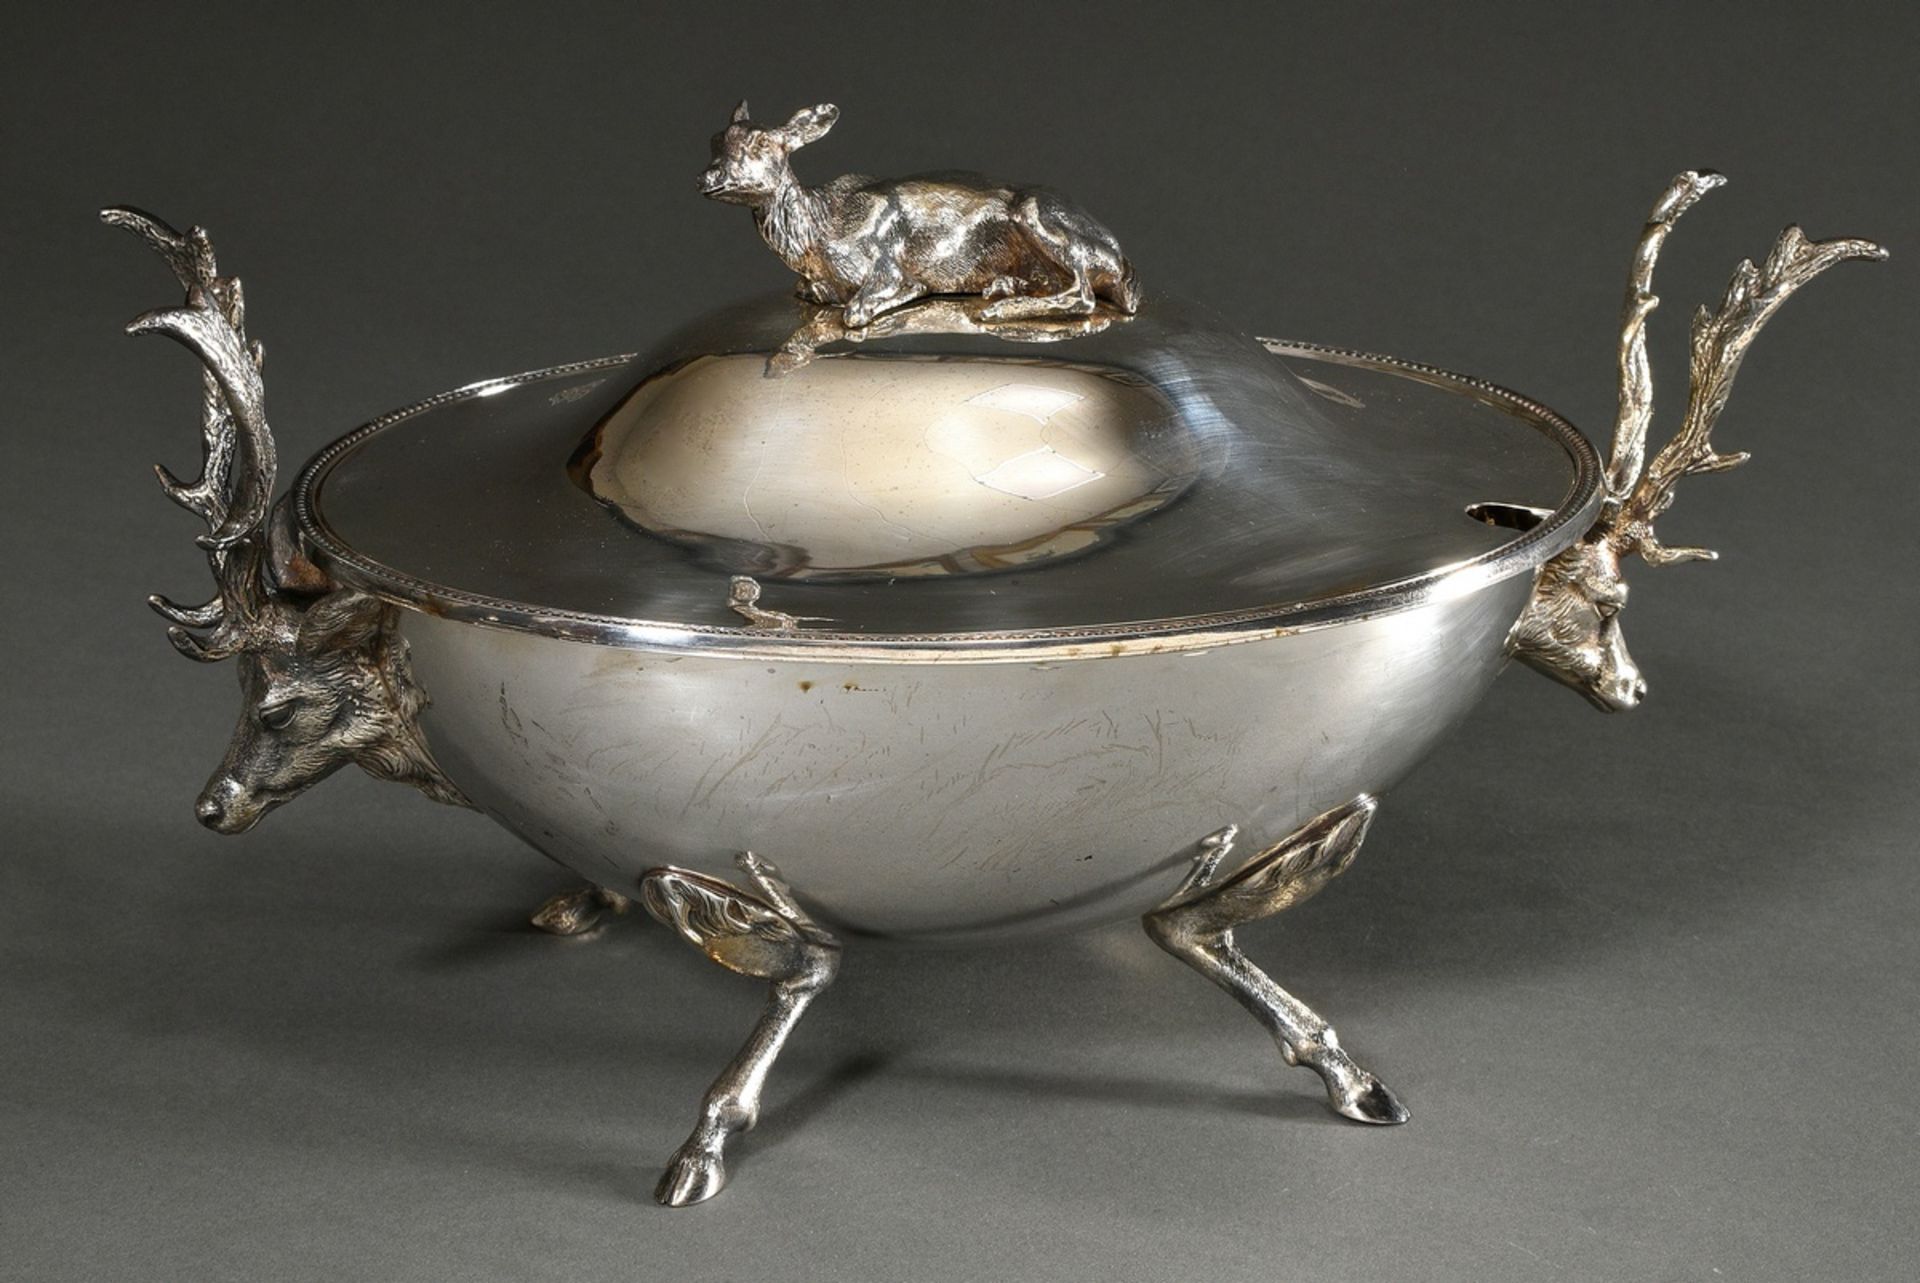 Decorative hunting lidded tureen with ovoid body on naturalistic cloven-hoofed feet and stag head h